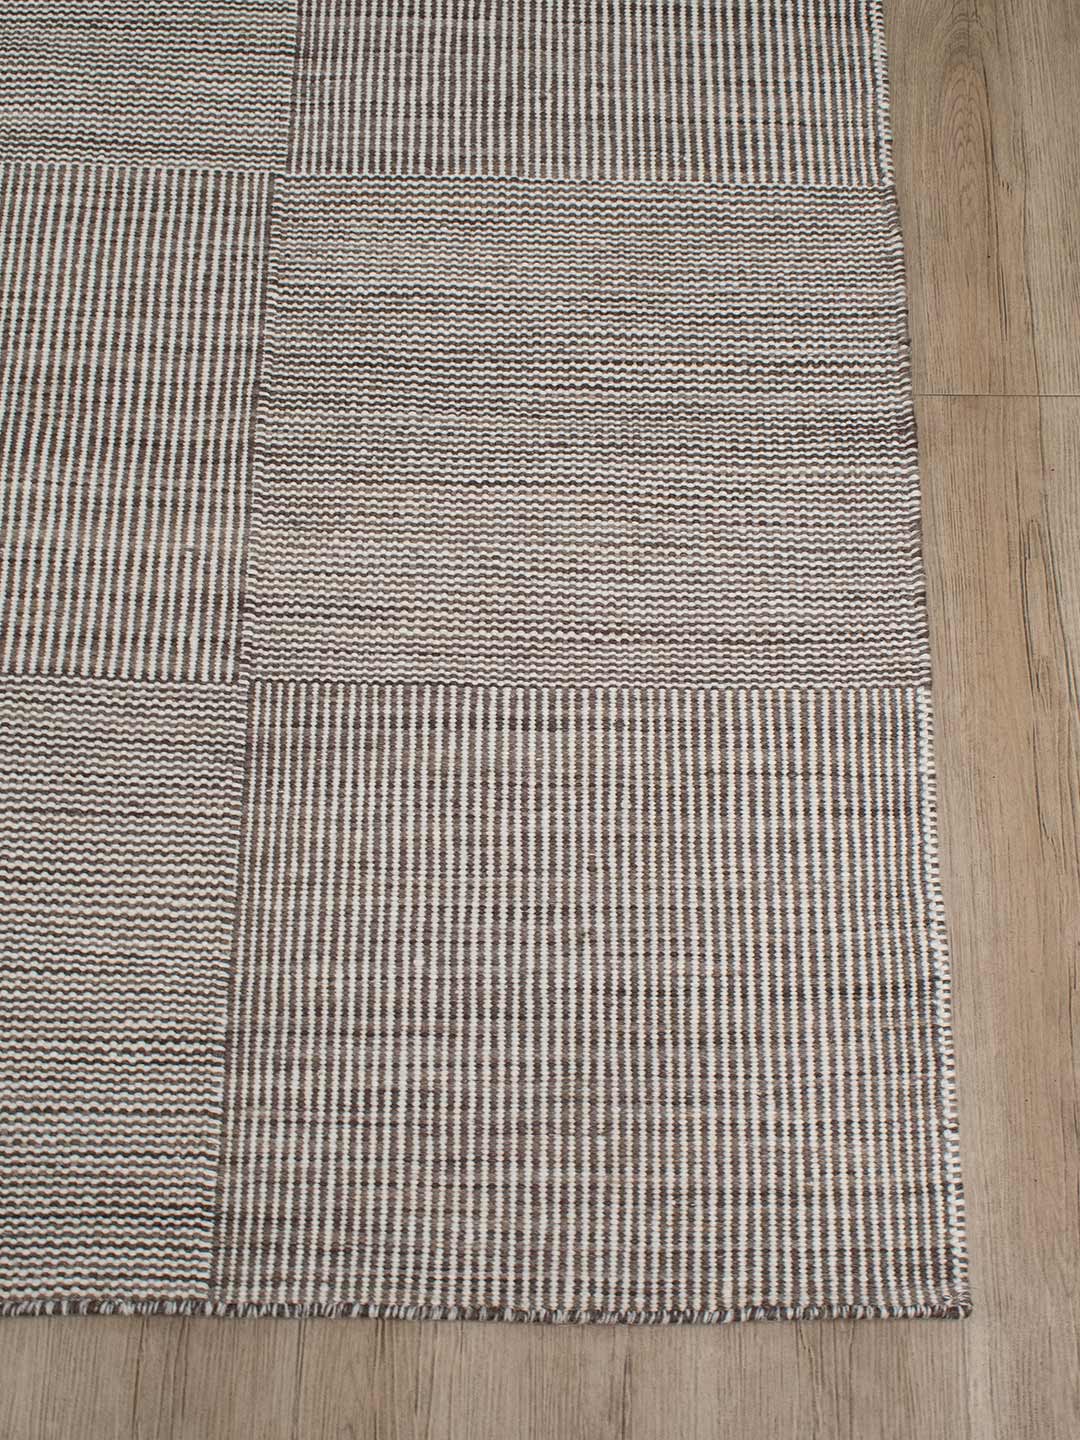 Braid Box Walnut Rug 20% off from the Rug Collection Stockist Make Your House A Home, Furniture Store Bendigo. Free Australia Wide Delivery